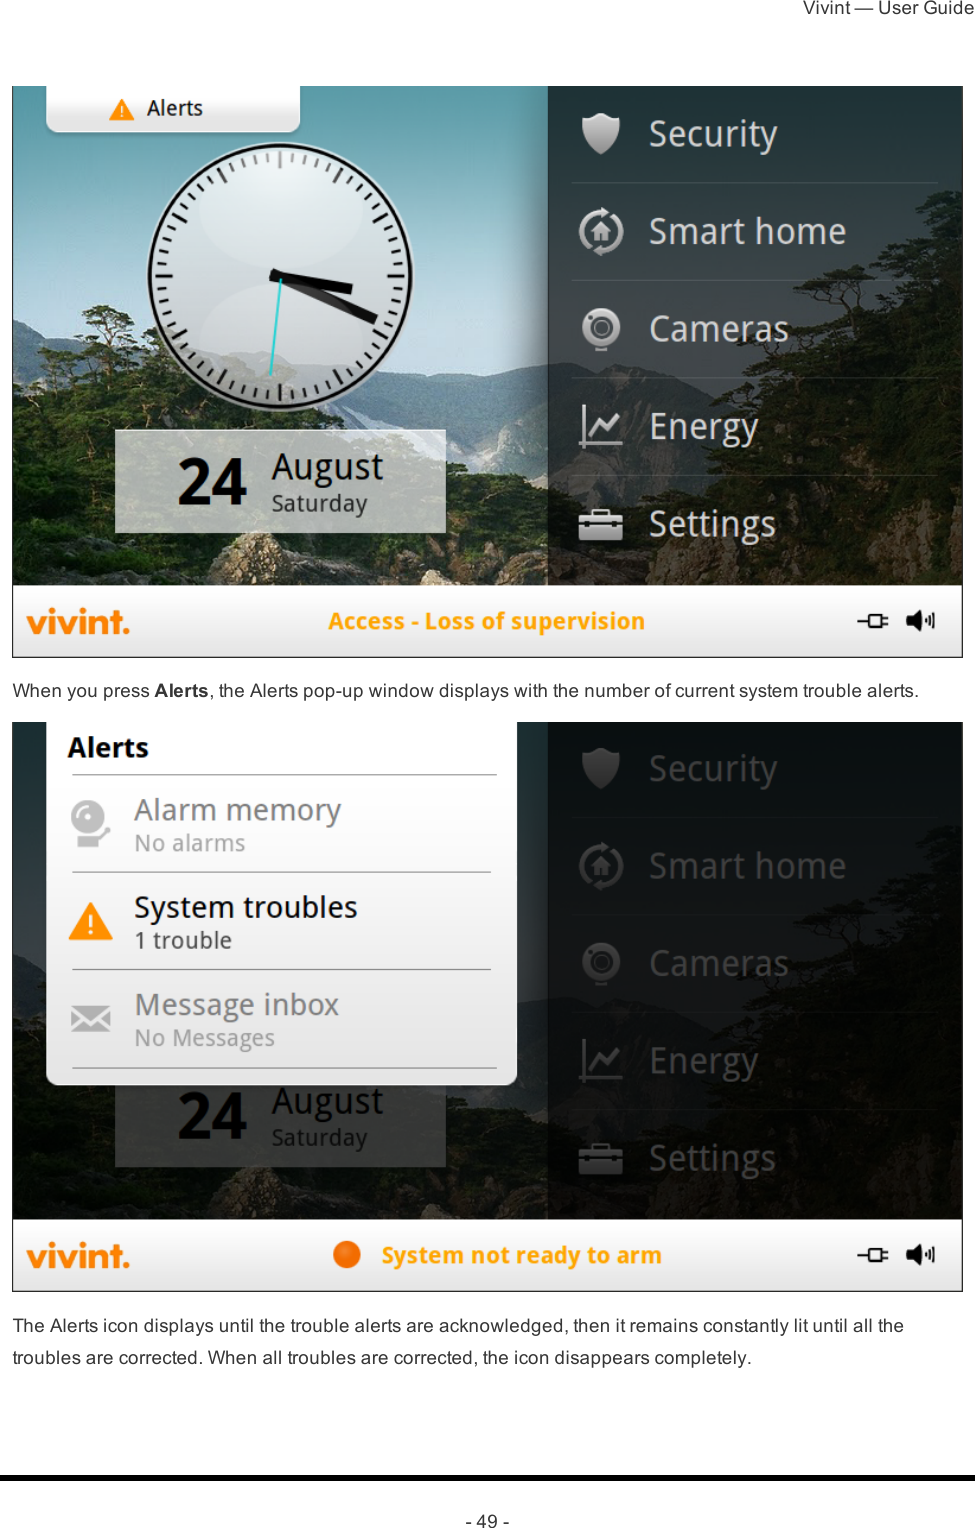 Vivint — User Guide- 49 -When you press Alerts, the Alerts pop-up window displays with the number of current system trouble alerts.The Alerts icon displays until the trouble alerts are acknowledged, then it remains constantly lit until all the troubles are corrected. When all troubles are corrected, the icon disappears completely.